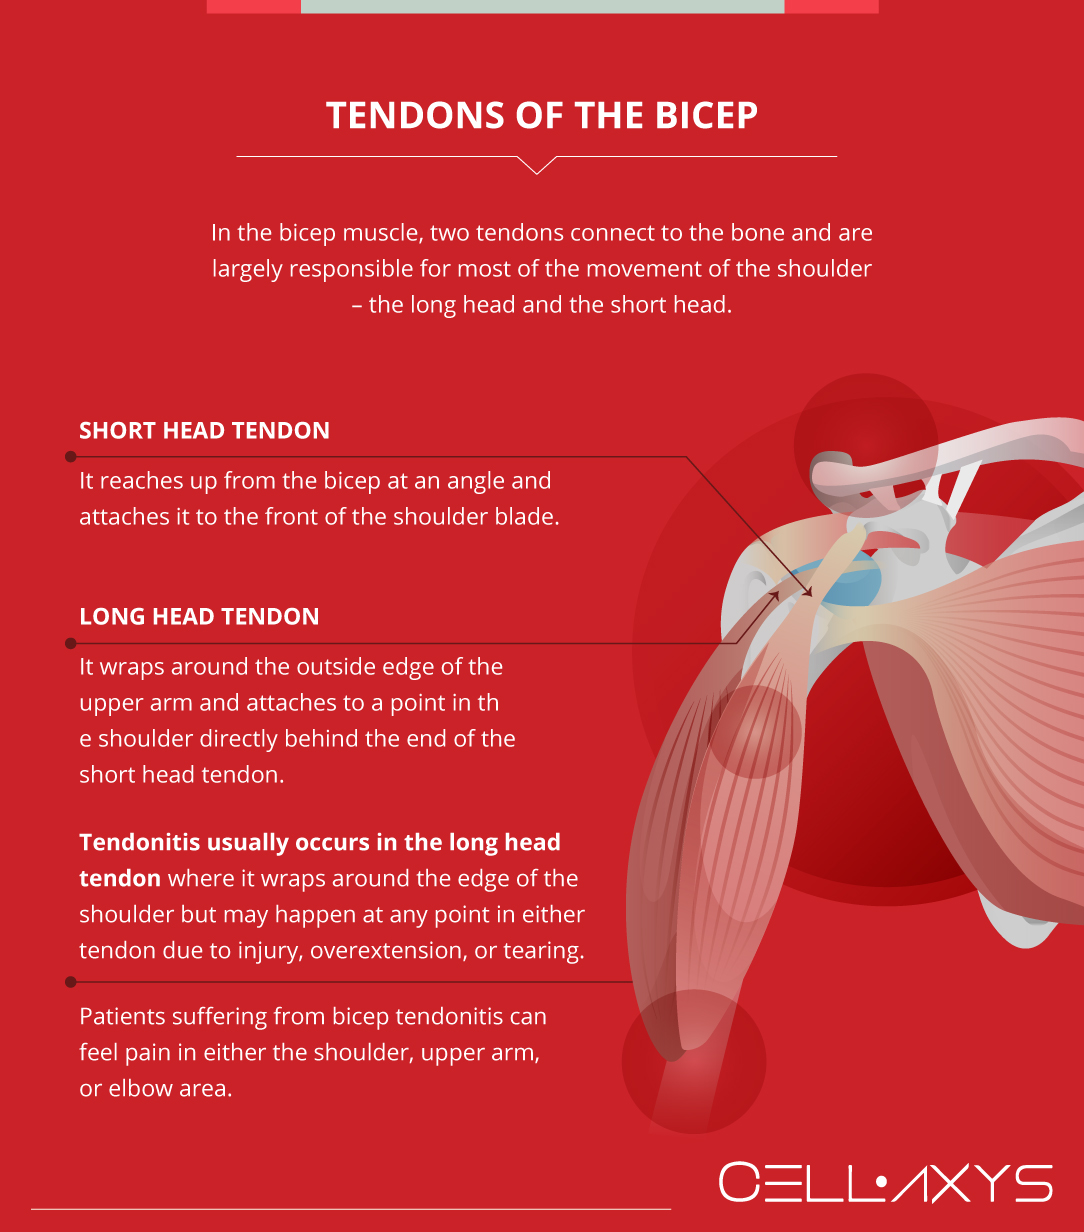 Tendons of the Bicep